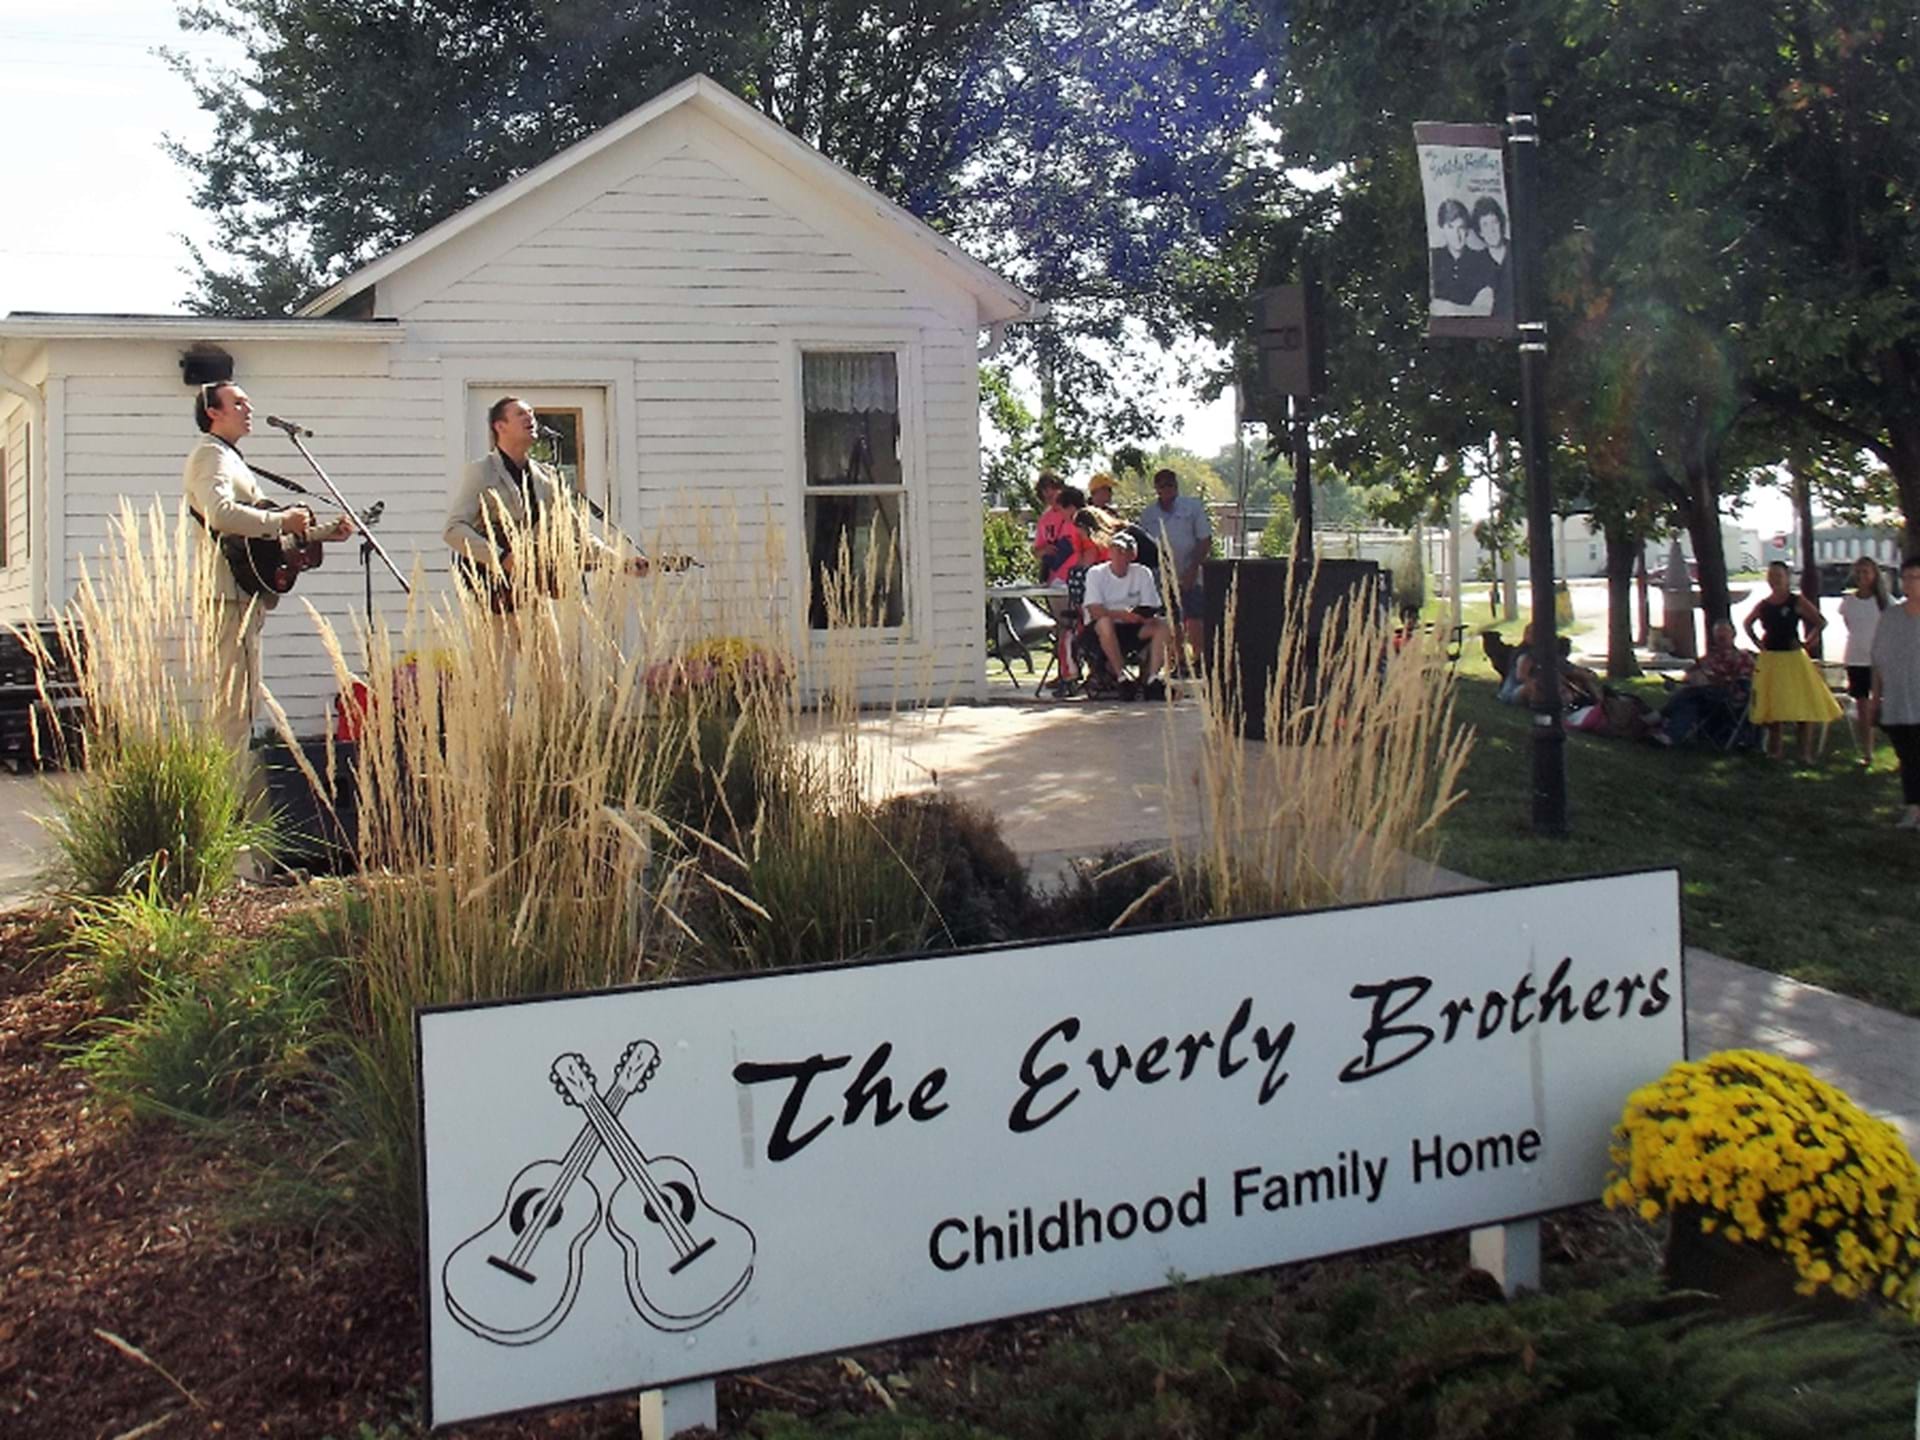 Free converts at the Everly Brothers Childhood Home